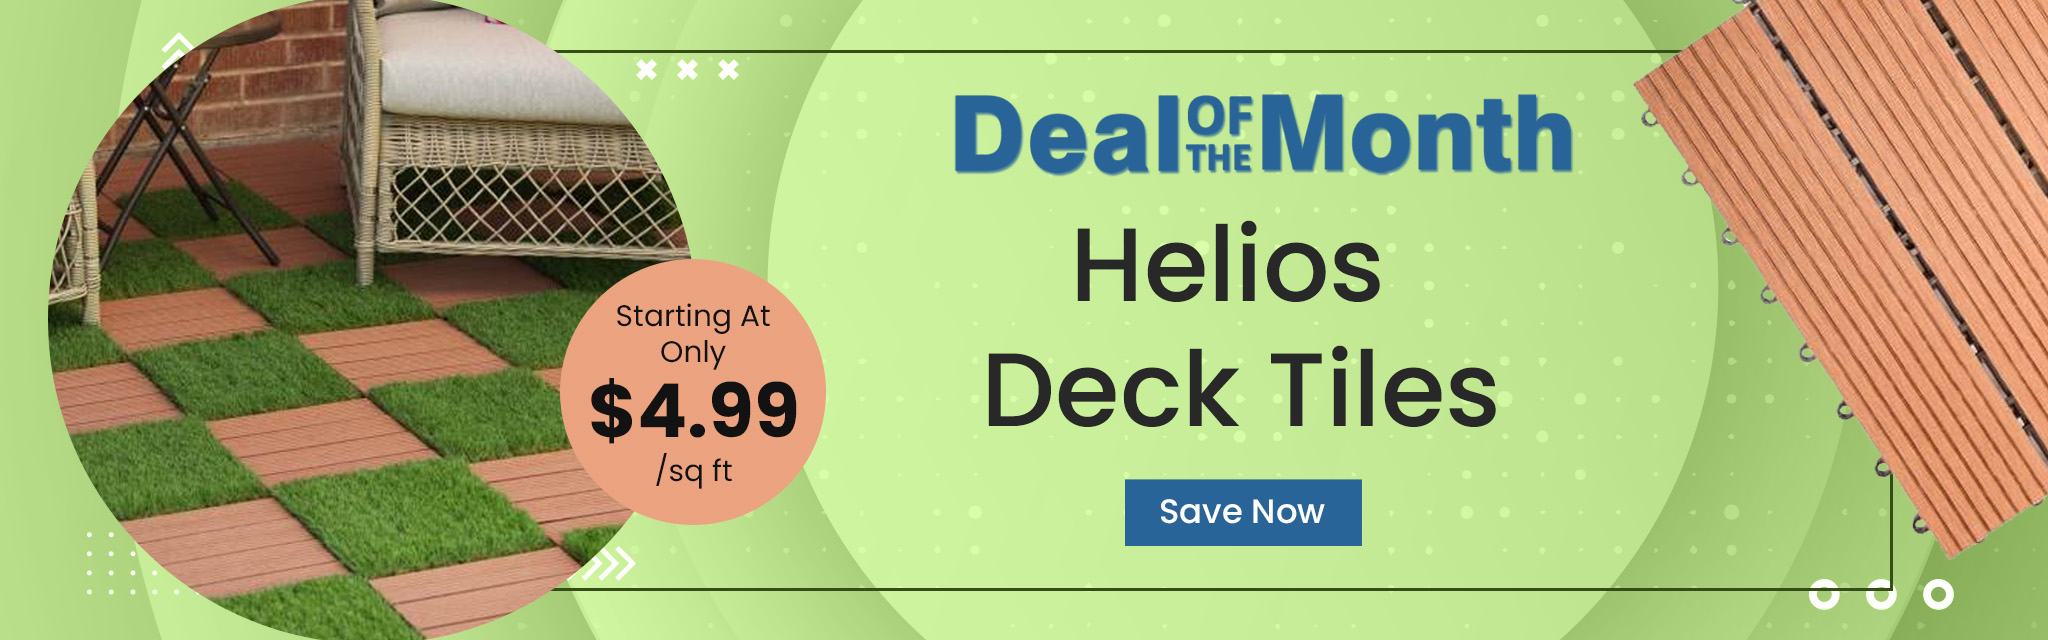 Deal Of The Month. Helios Deck Tiles. Starting At Only $4.99 per square feet. Save Now